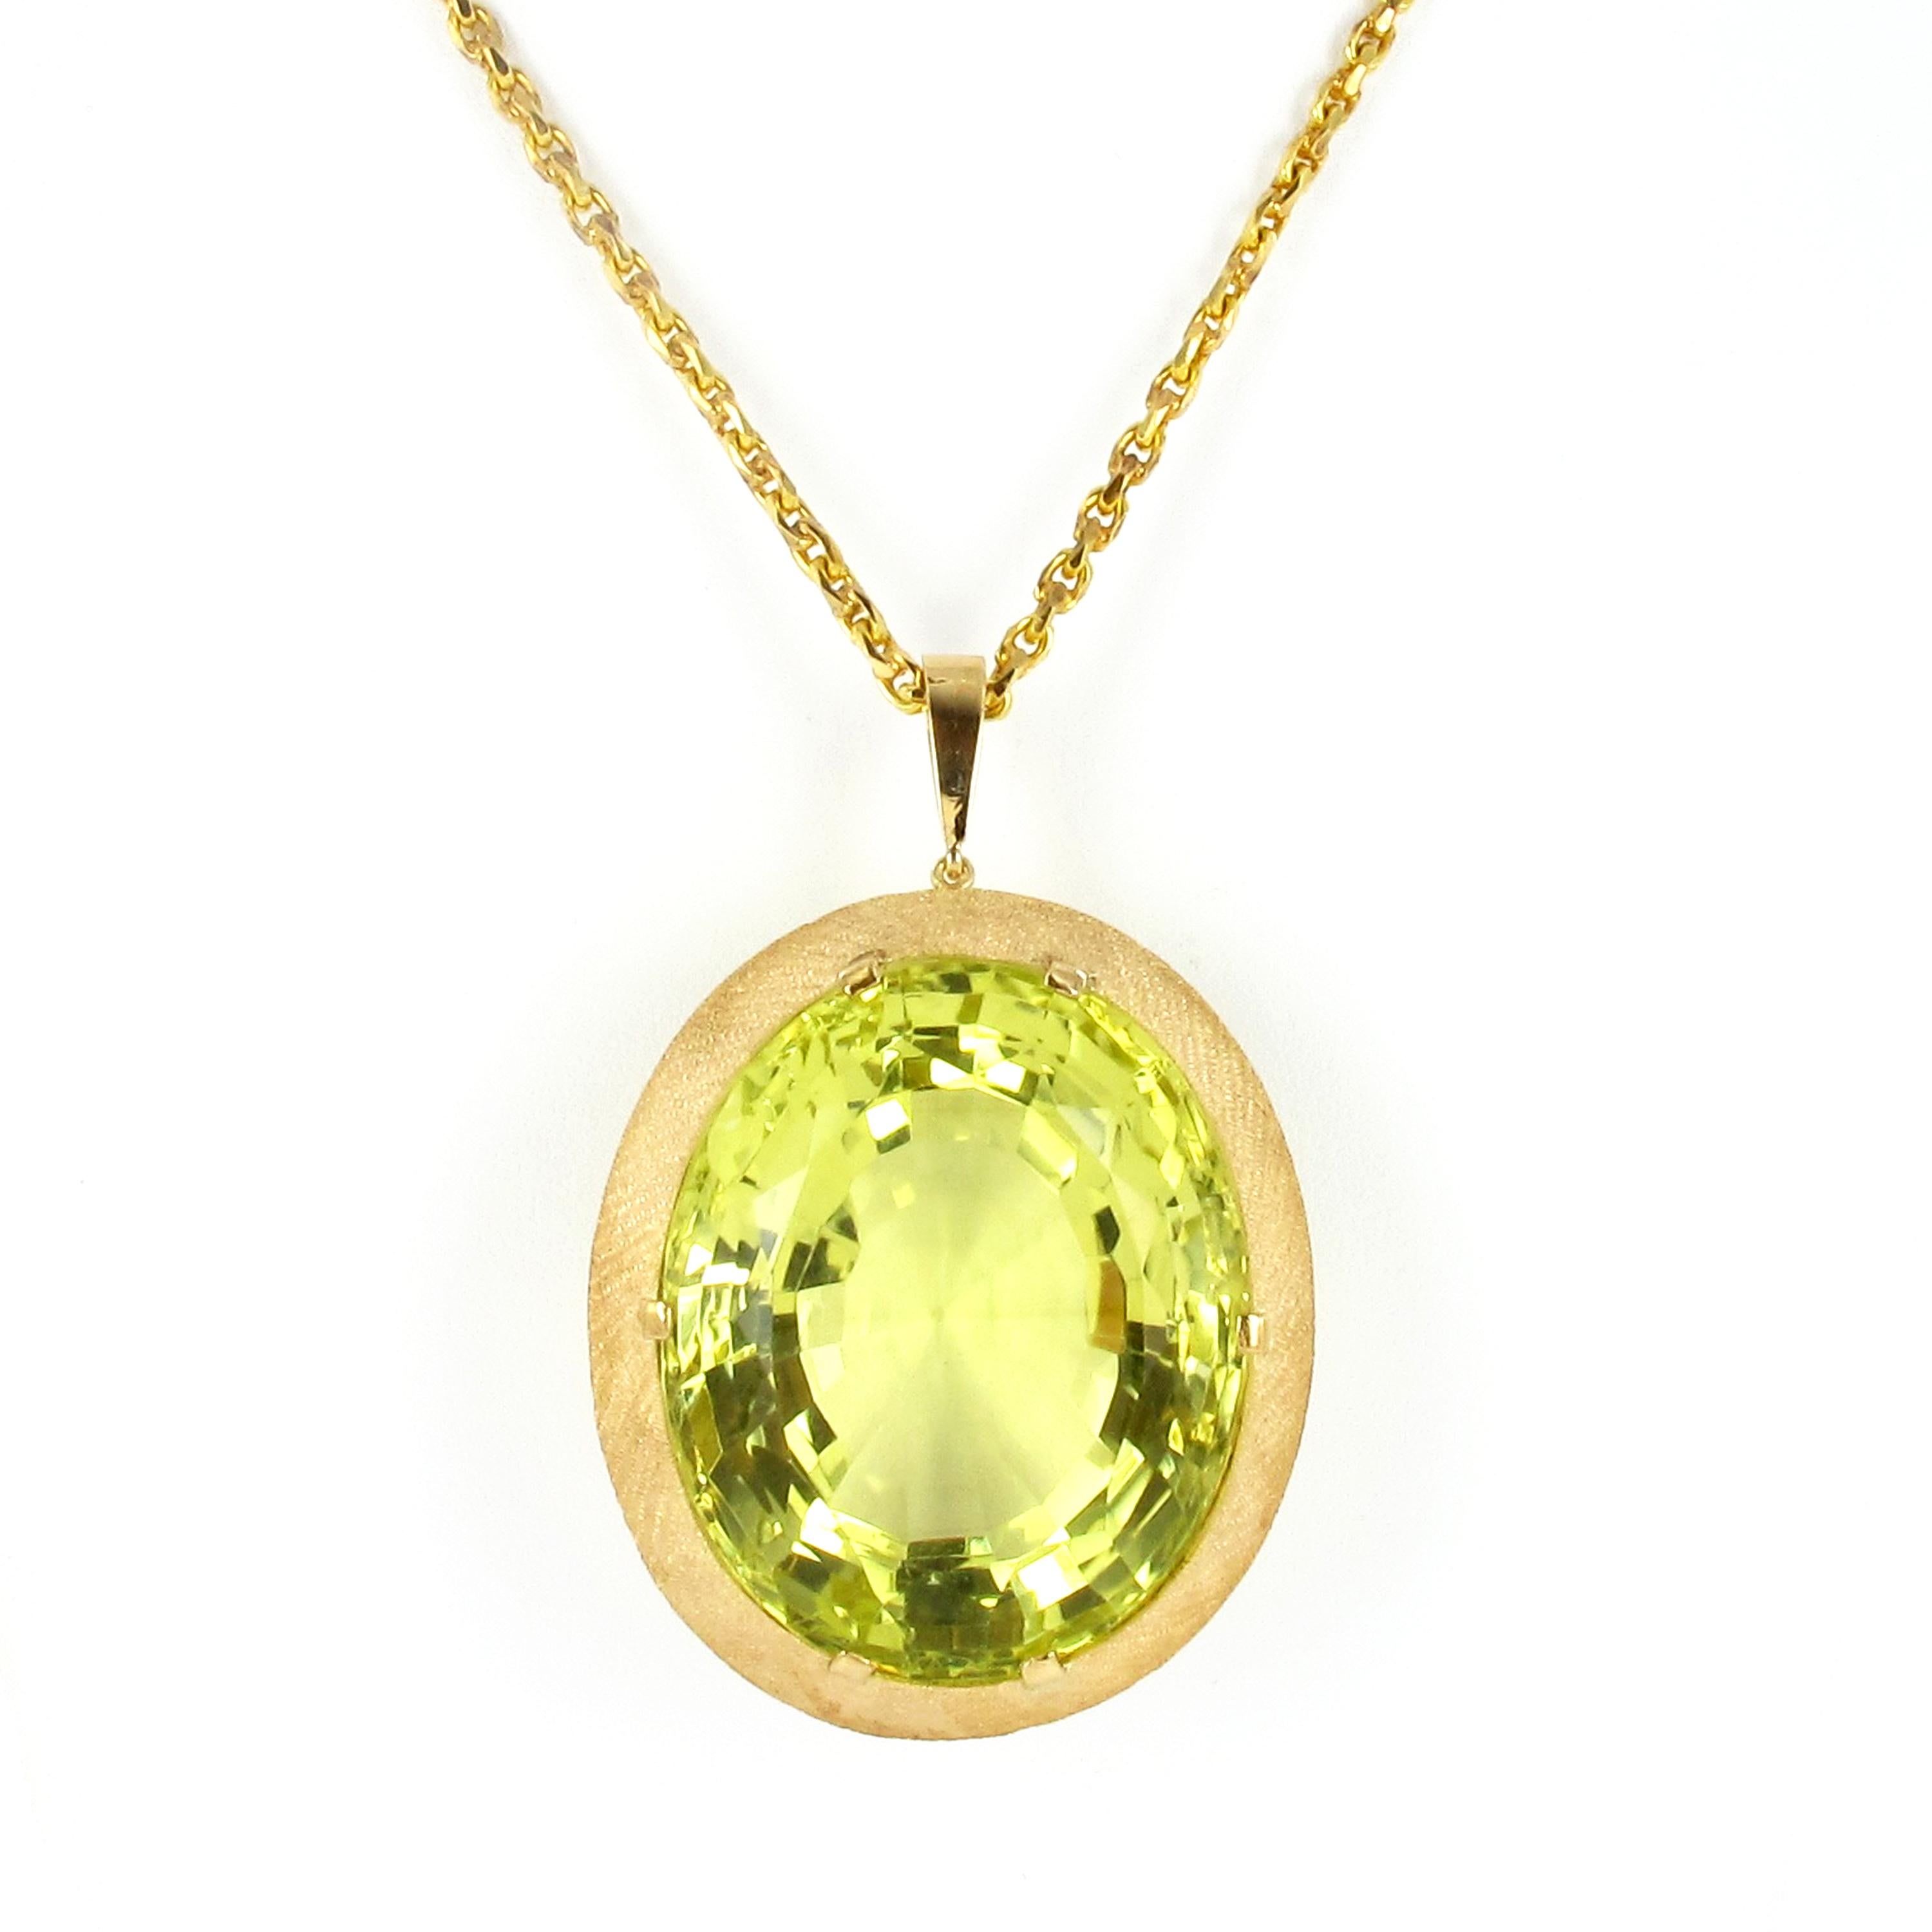 Massive Lemonquarz pendant necklace in yellow gold 750. The pendant is set with an impressive oval cut Lemonquarz of approximate 250 cts. Dimensions of the stone are approximate 46 x 37 x 27 mm.

Nice anchor chain in yellow gold 750 with hook